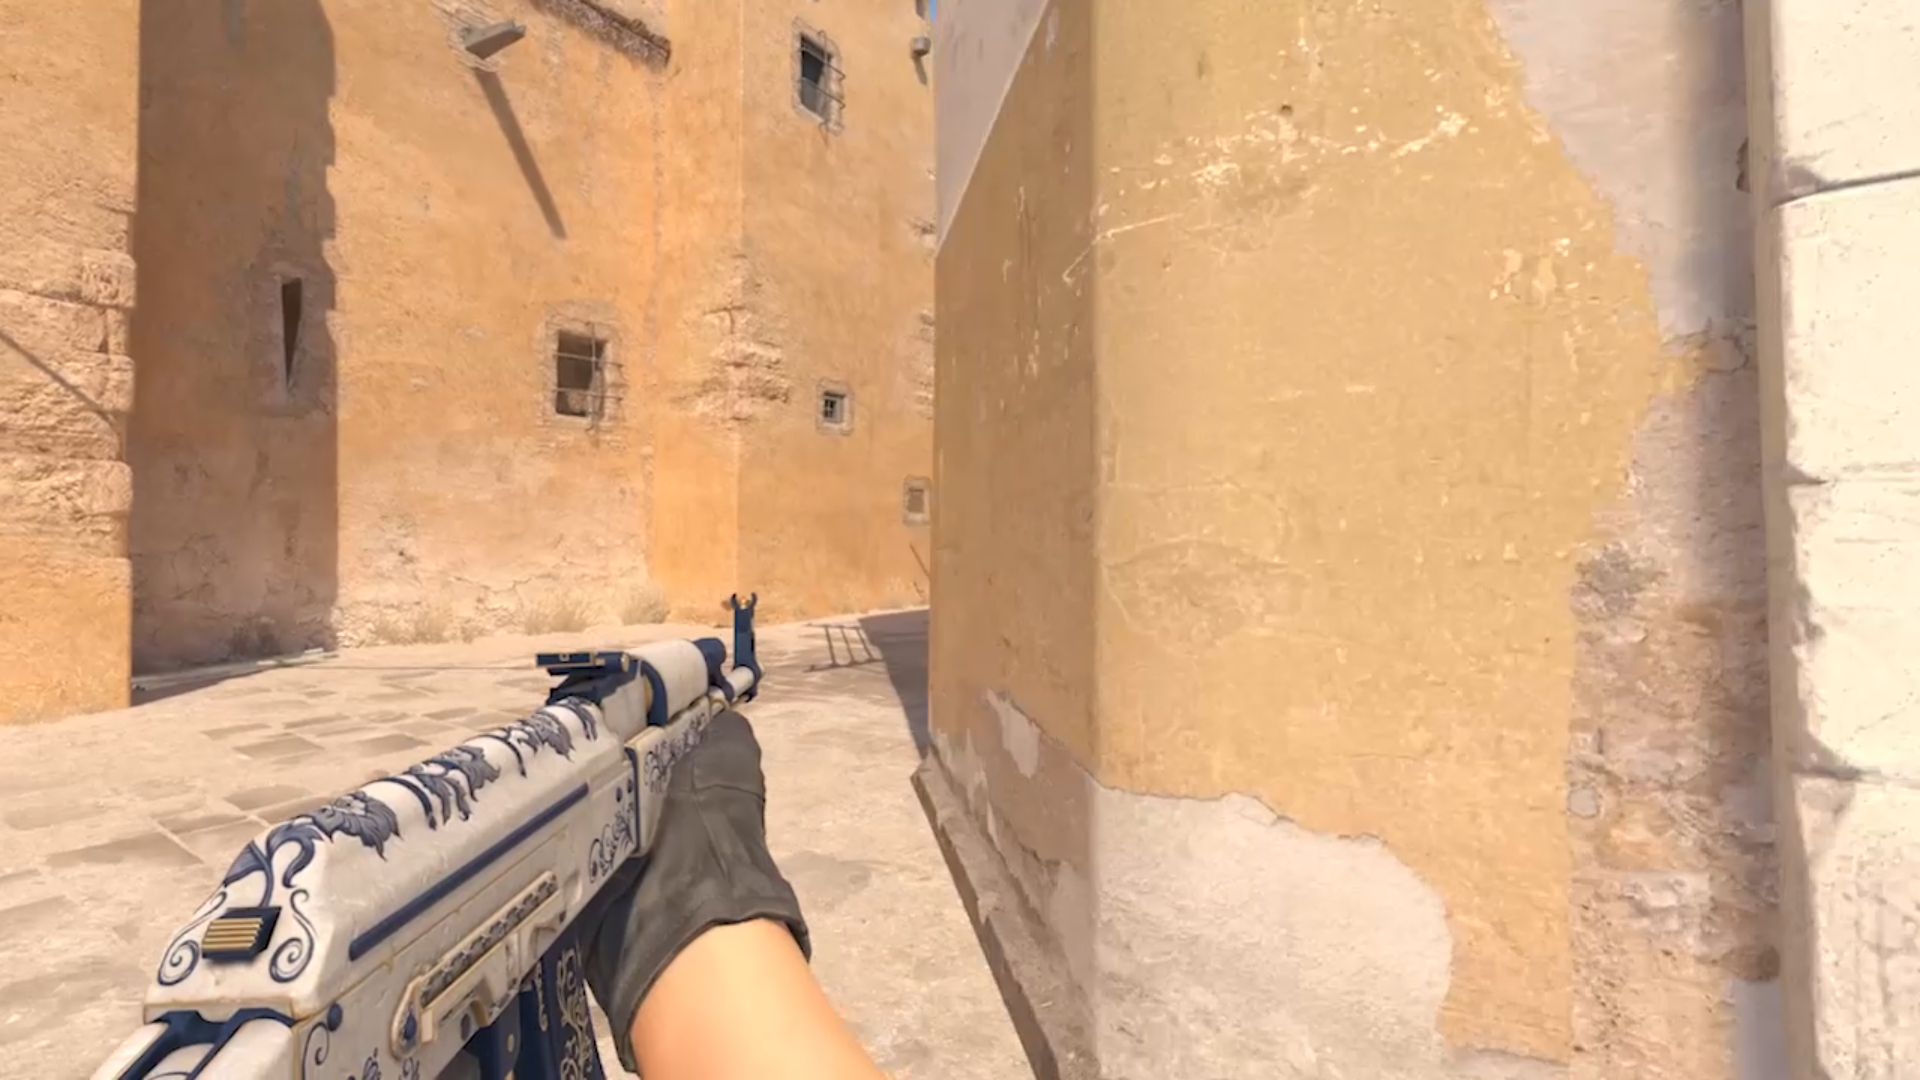 Counter-Strike 2 adds a lefty mode